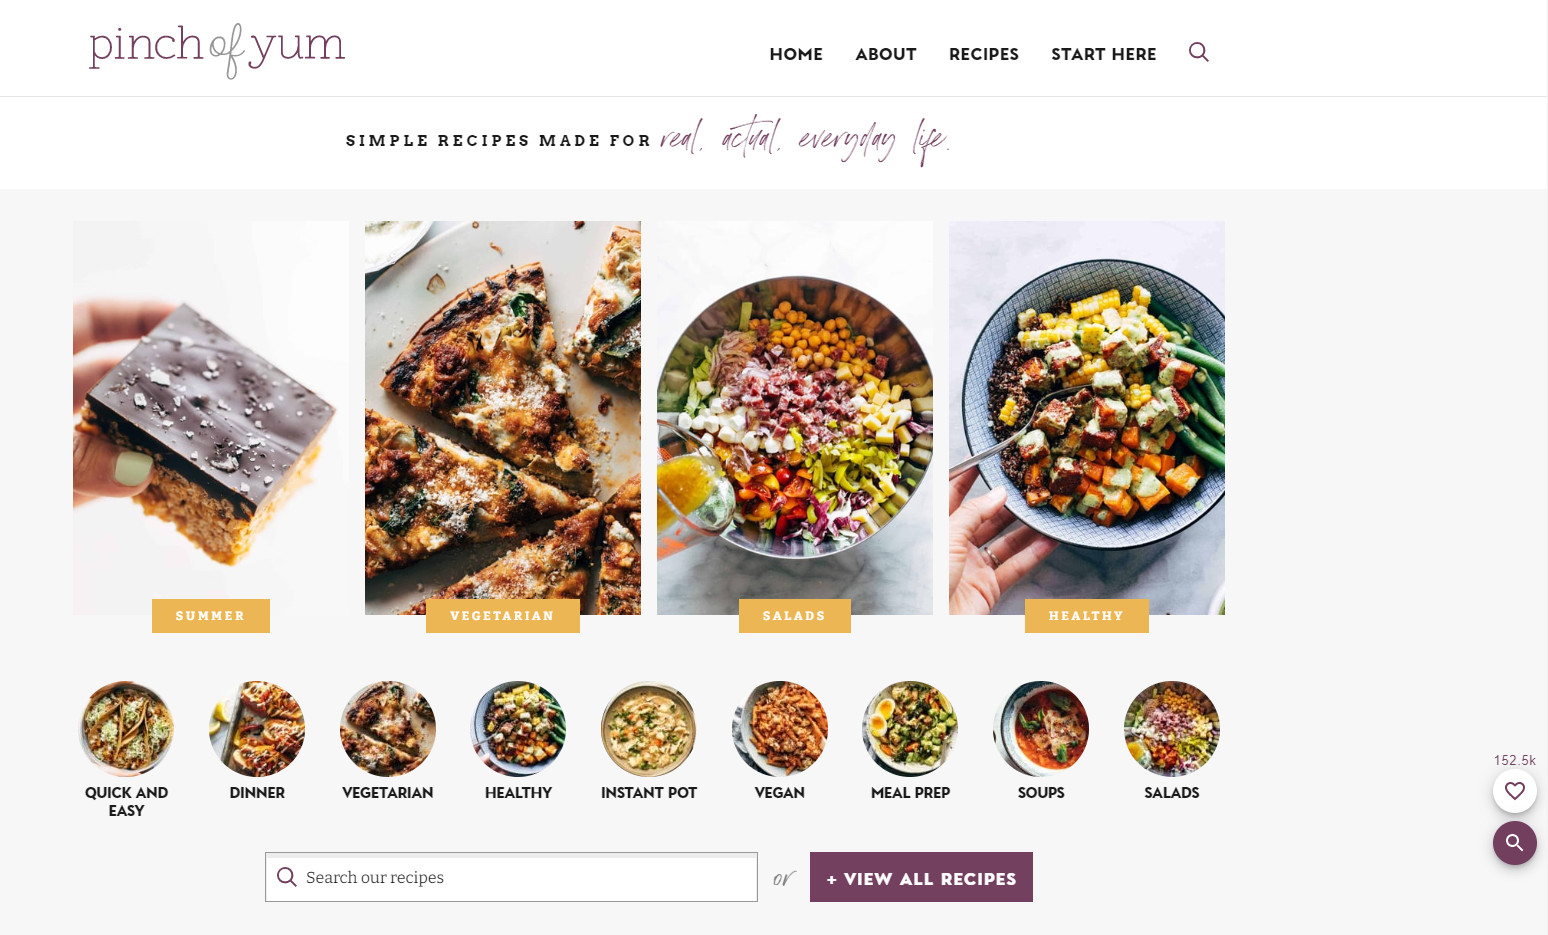  Food blogs like Pinch of Yum are idea spots for finding delicious recipes, food stories, and so much more